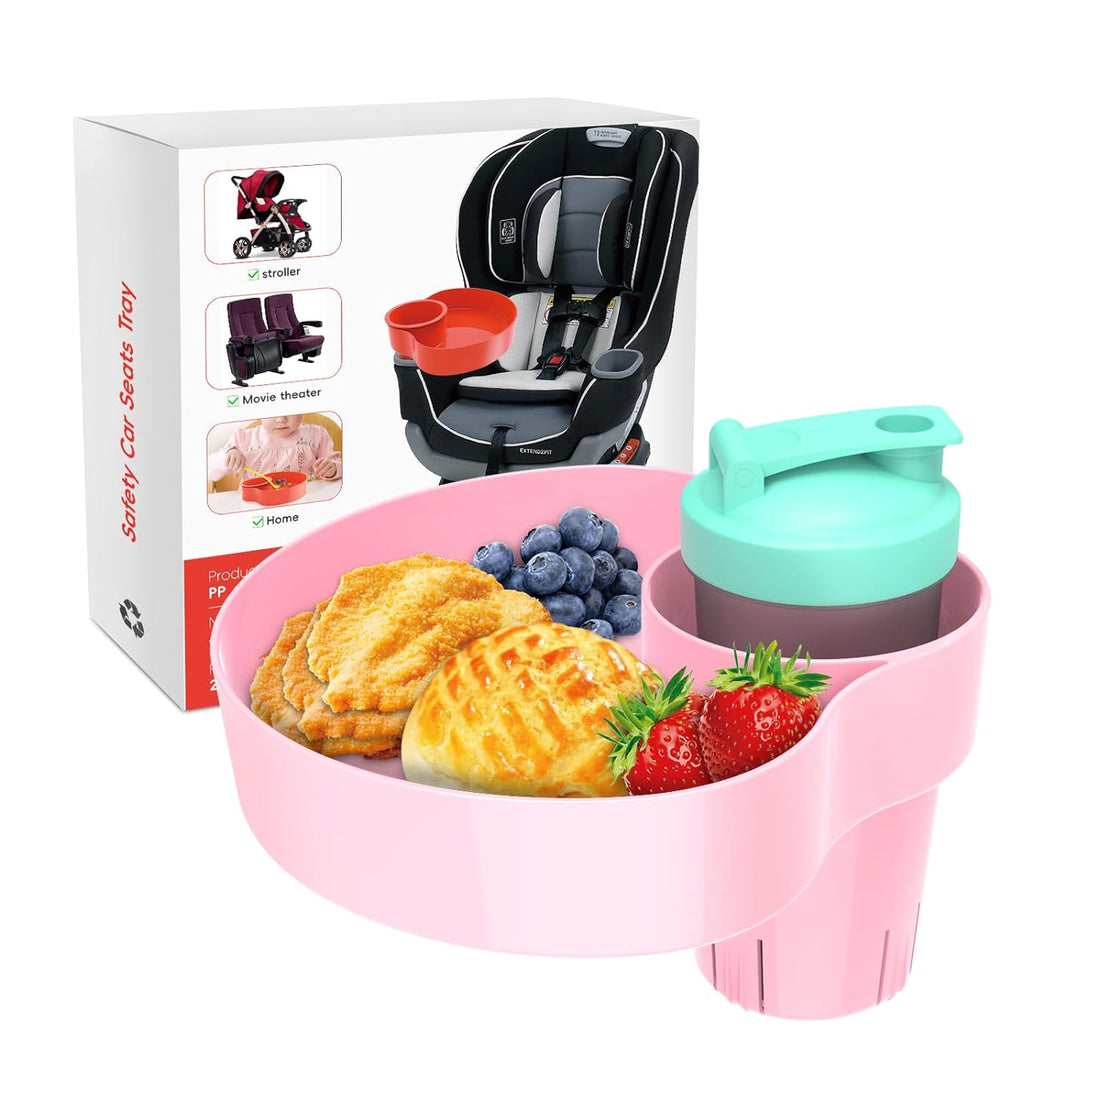 OMYPOTT Kids Car Seat Snack Tray: Travel Trays for Kids Car Cup Holder, Toddler Road Trip Essential, Travel Snacks Food Plate for Stroller, Boosters, and Anywhere with a Cup Holder -Pink